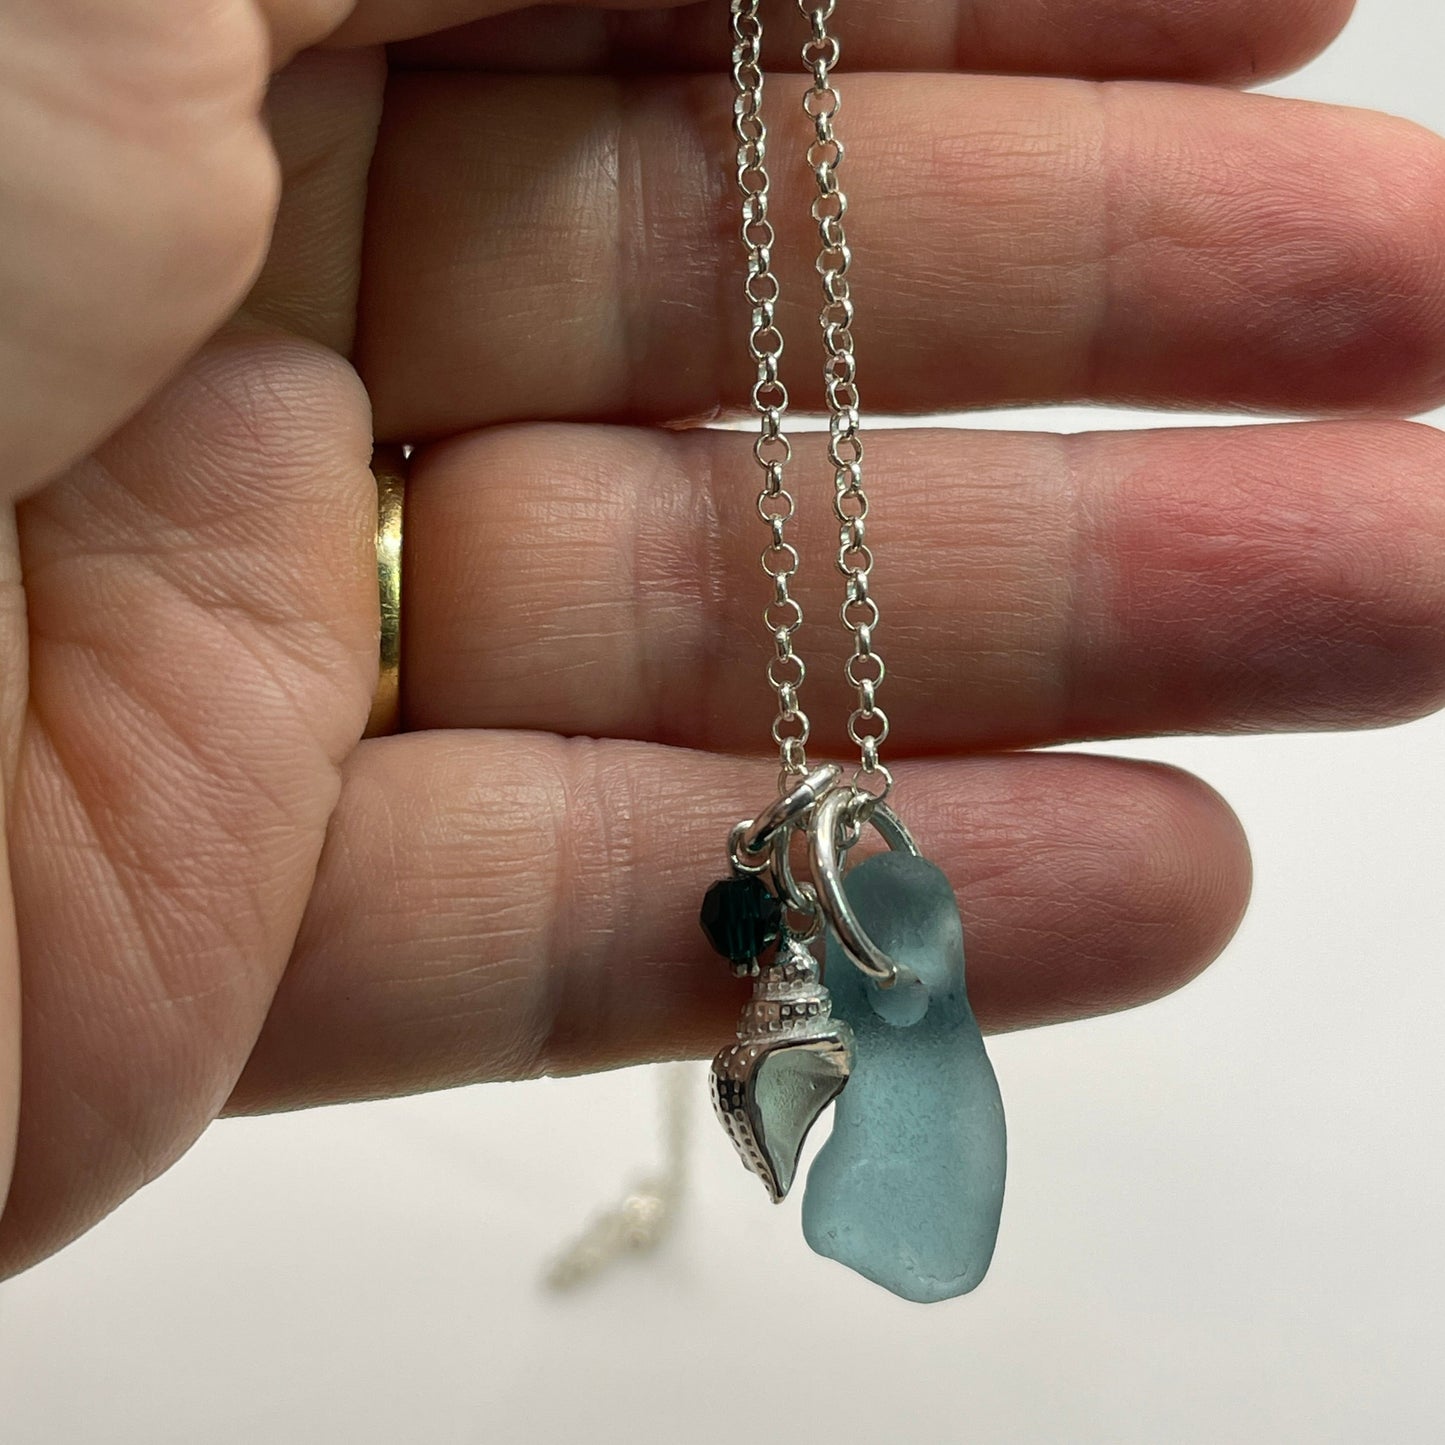 Seaglass & charms necklace